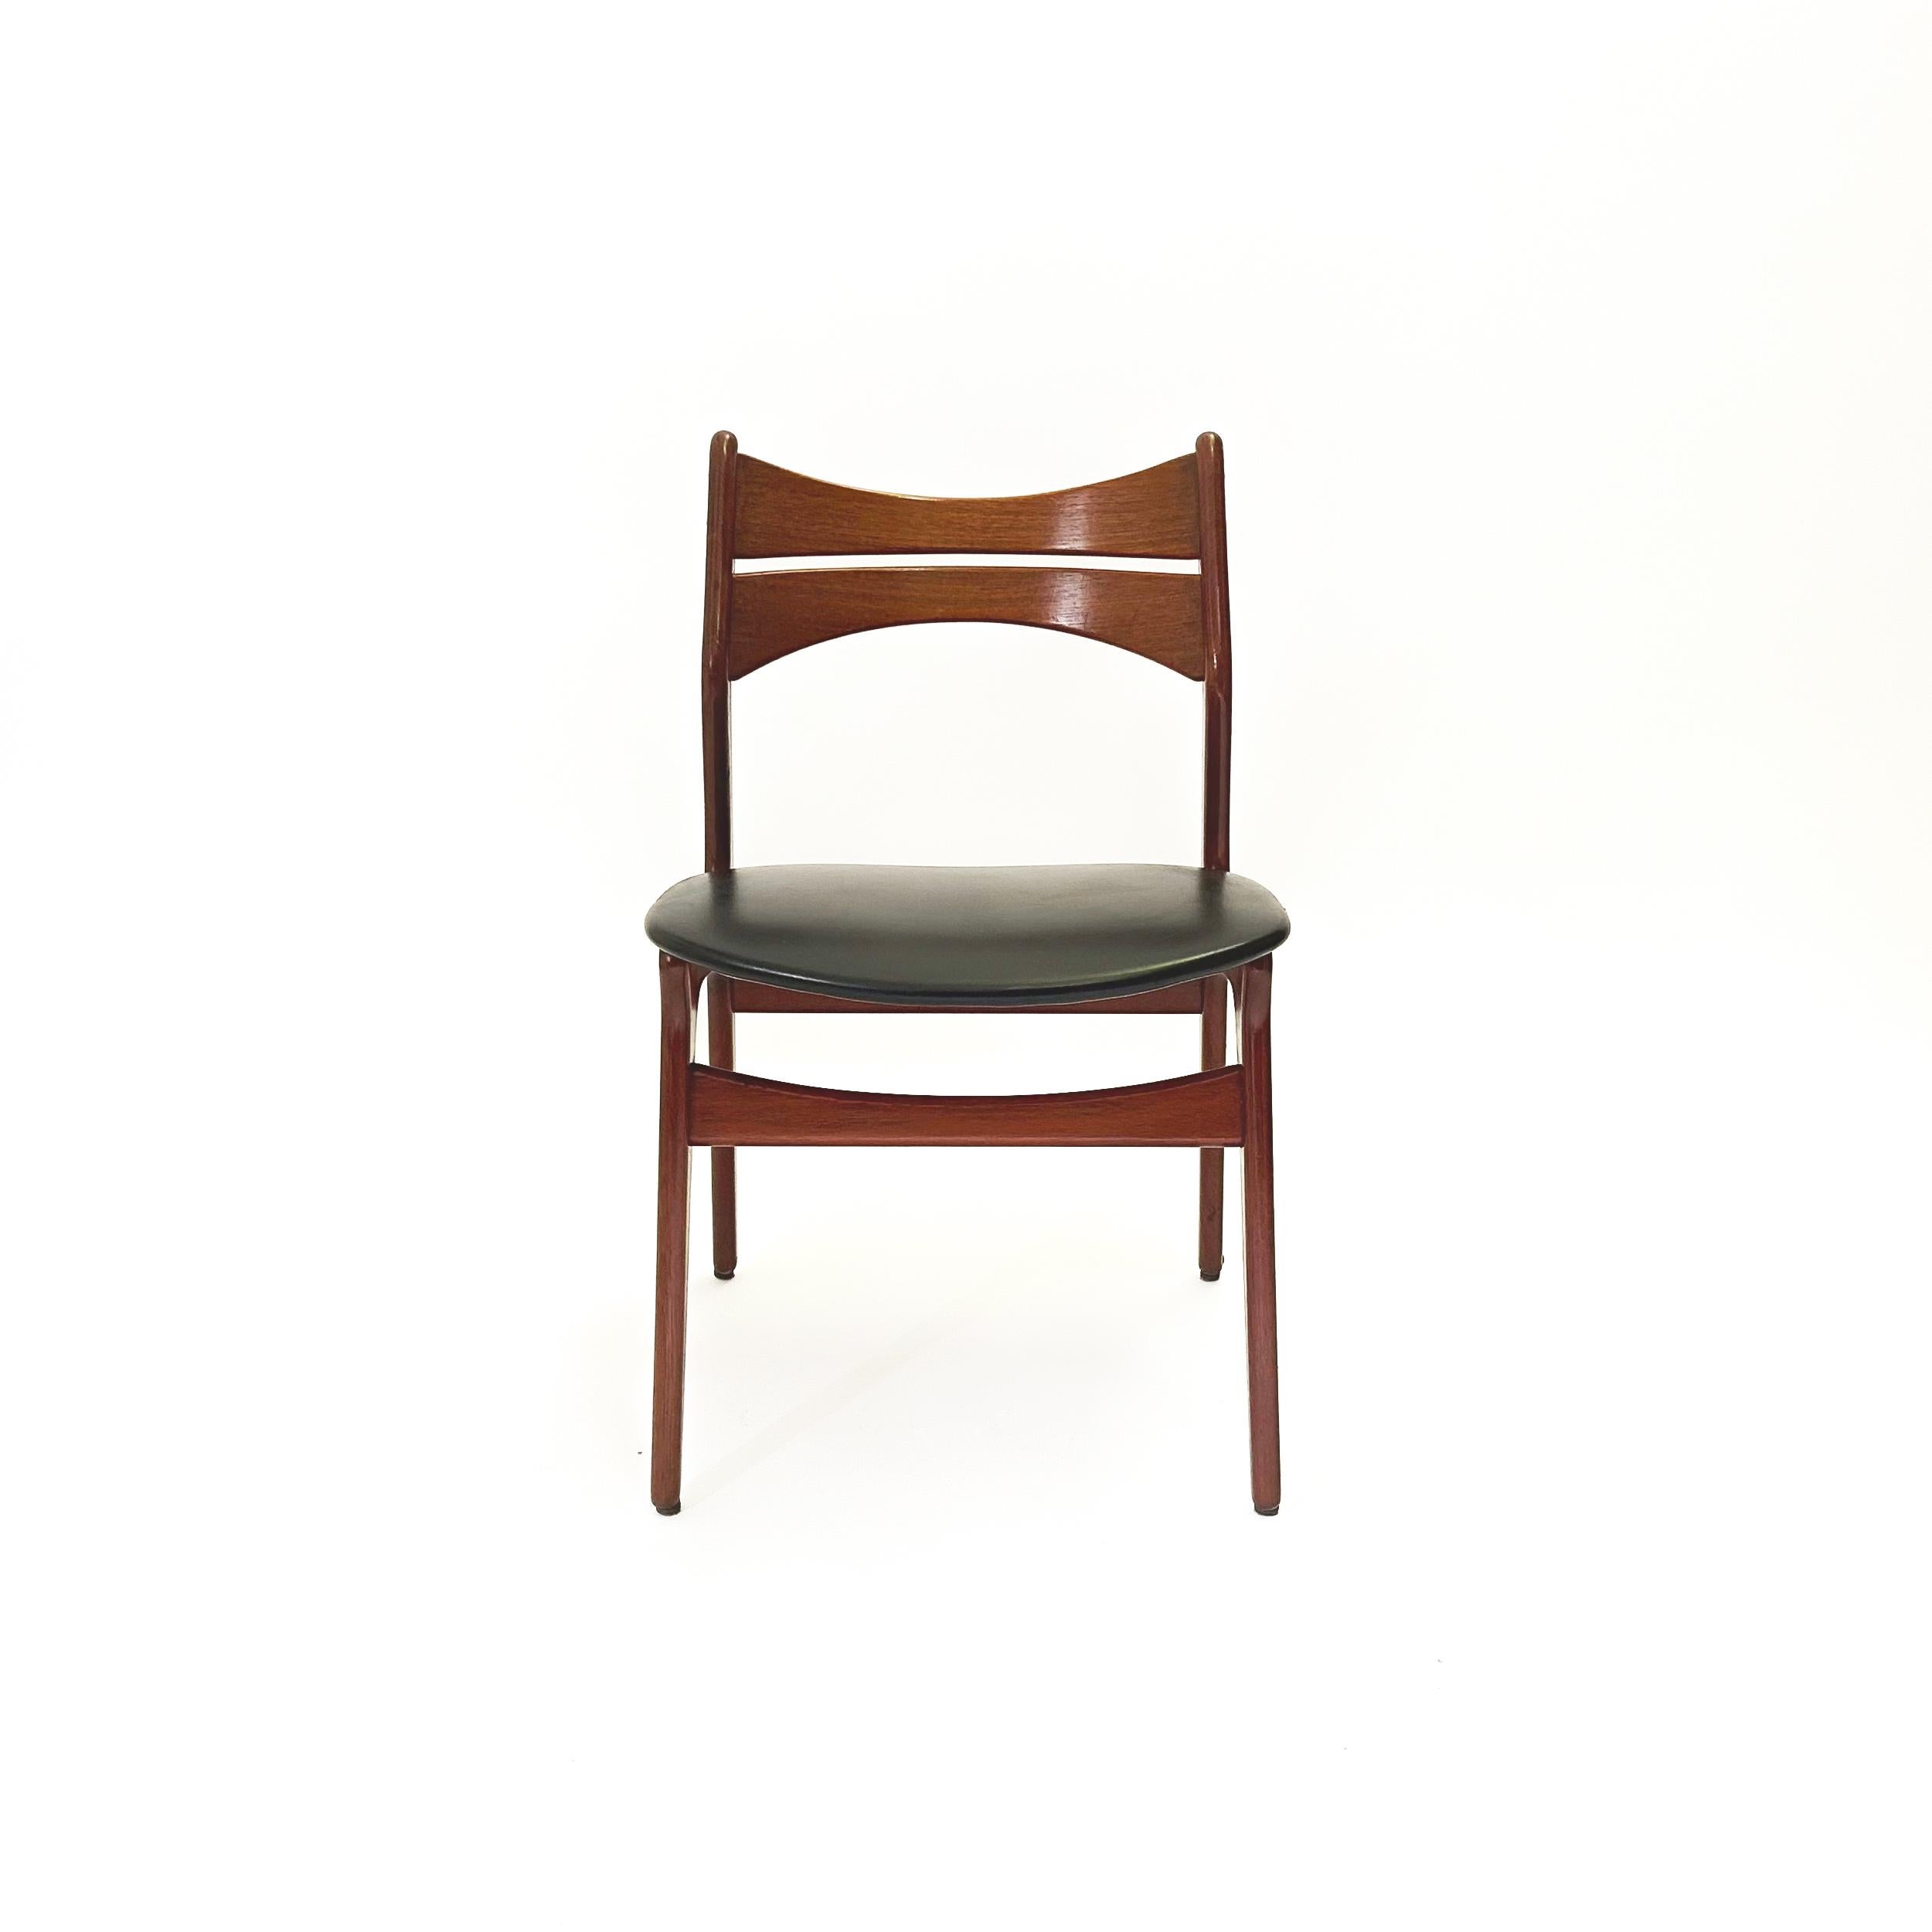 Erik Buch 1960s Teak Dining Chair - Model 310. This set comprises seven mid-century dining room chairs designed by Erik Buch for Chr. Christiansen Denmark, known as model 310.
Crafted with a sturdy teak frame and a comfortably angled backrest, these